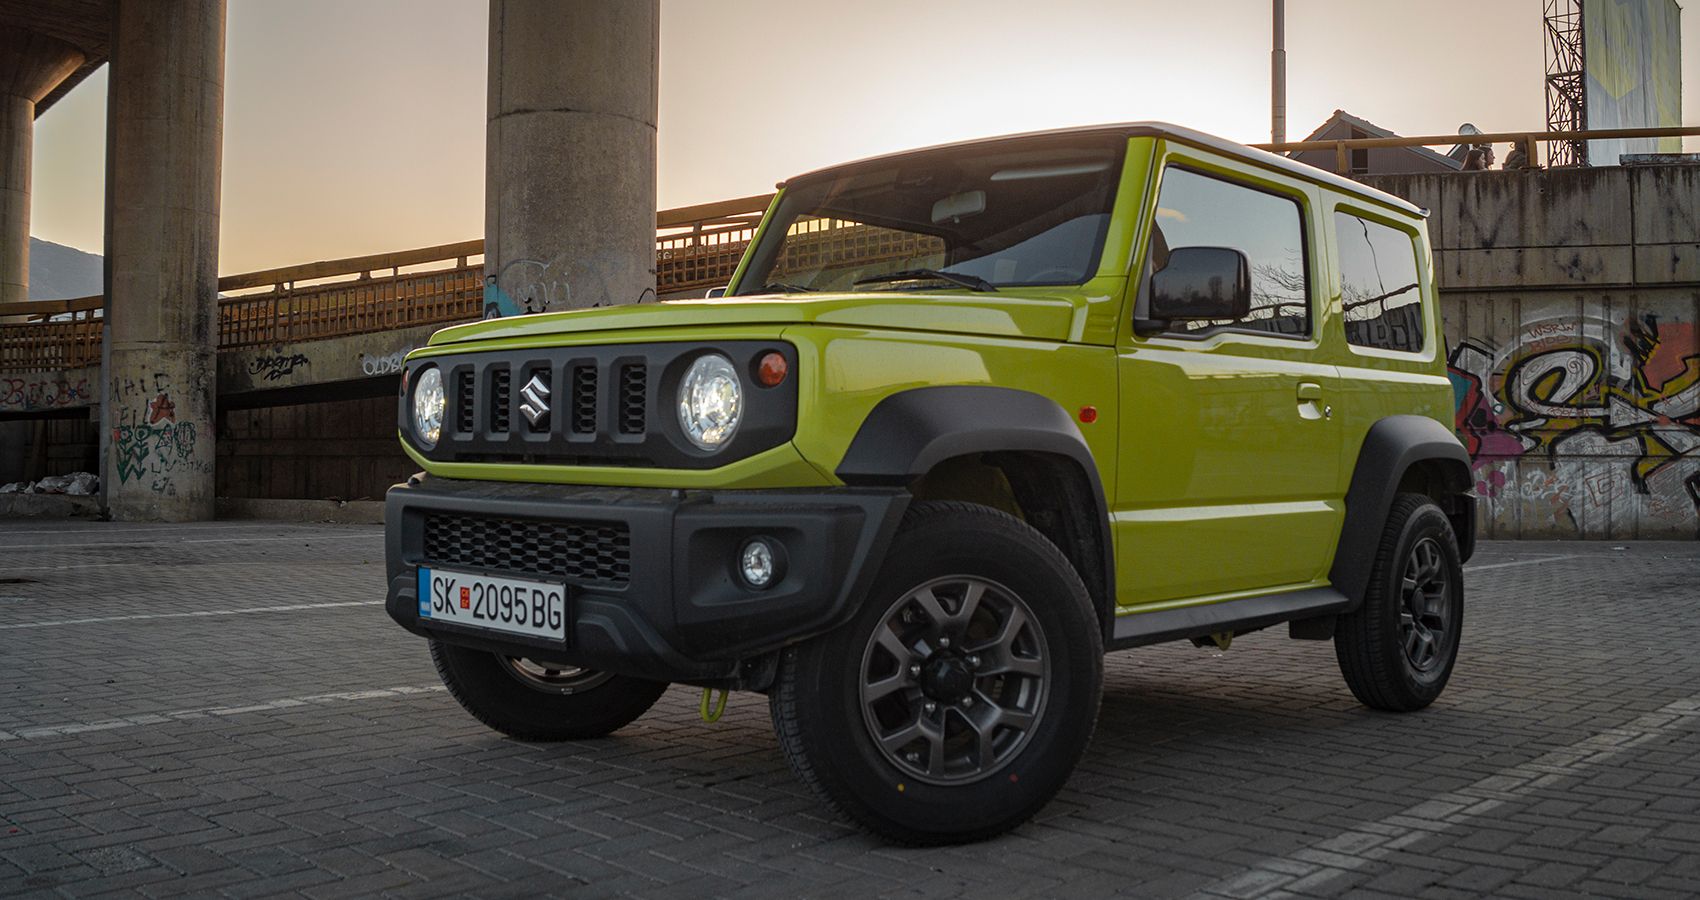 Front 3/4 view of a green Jimny in the sunset